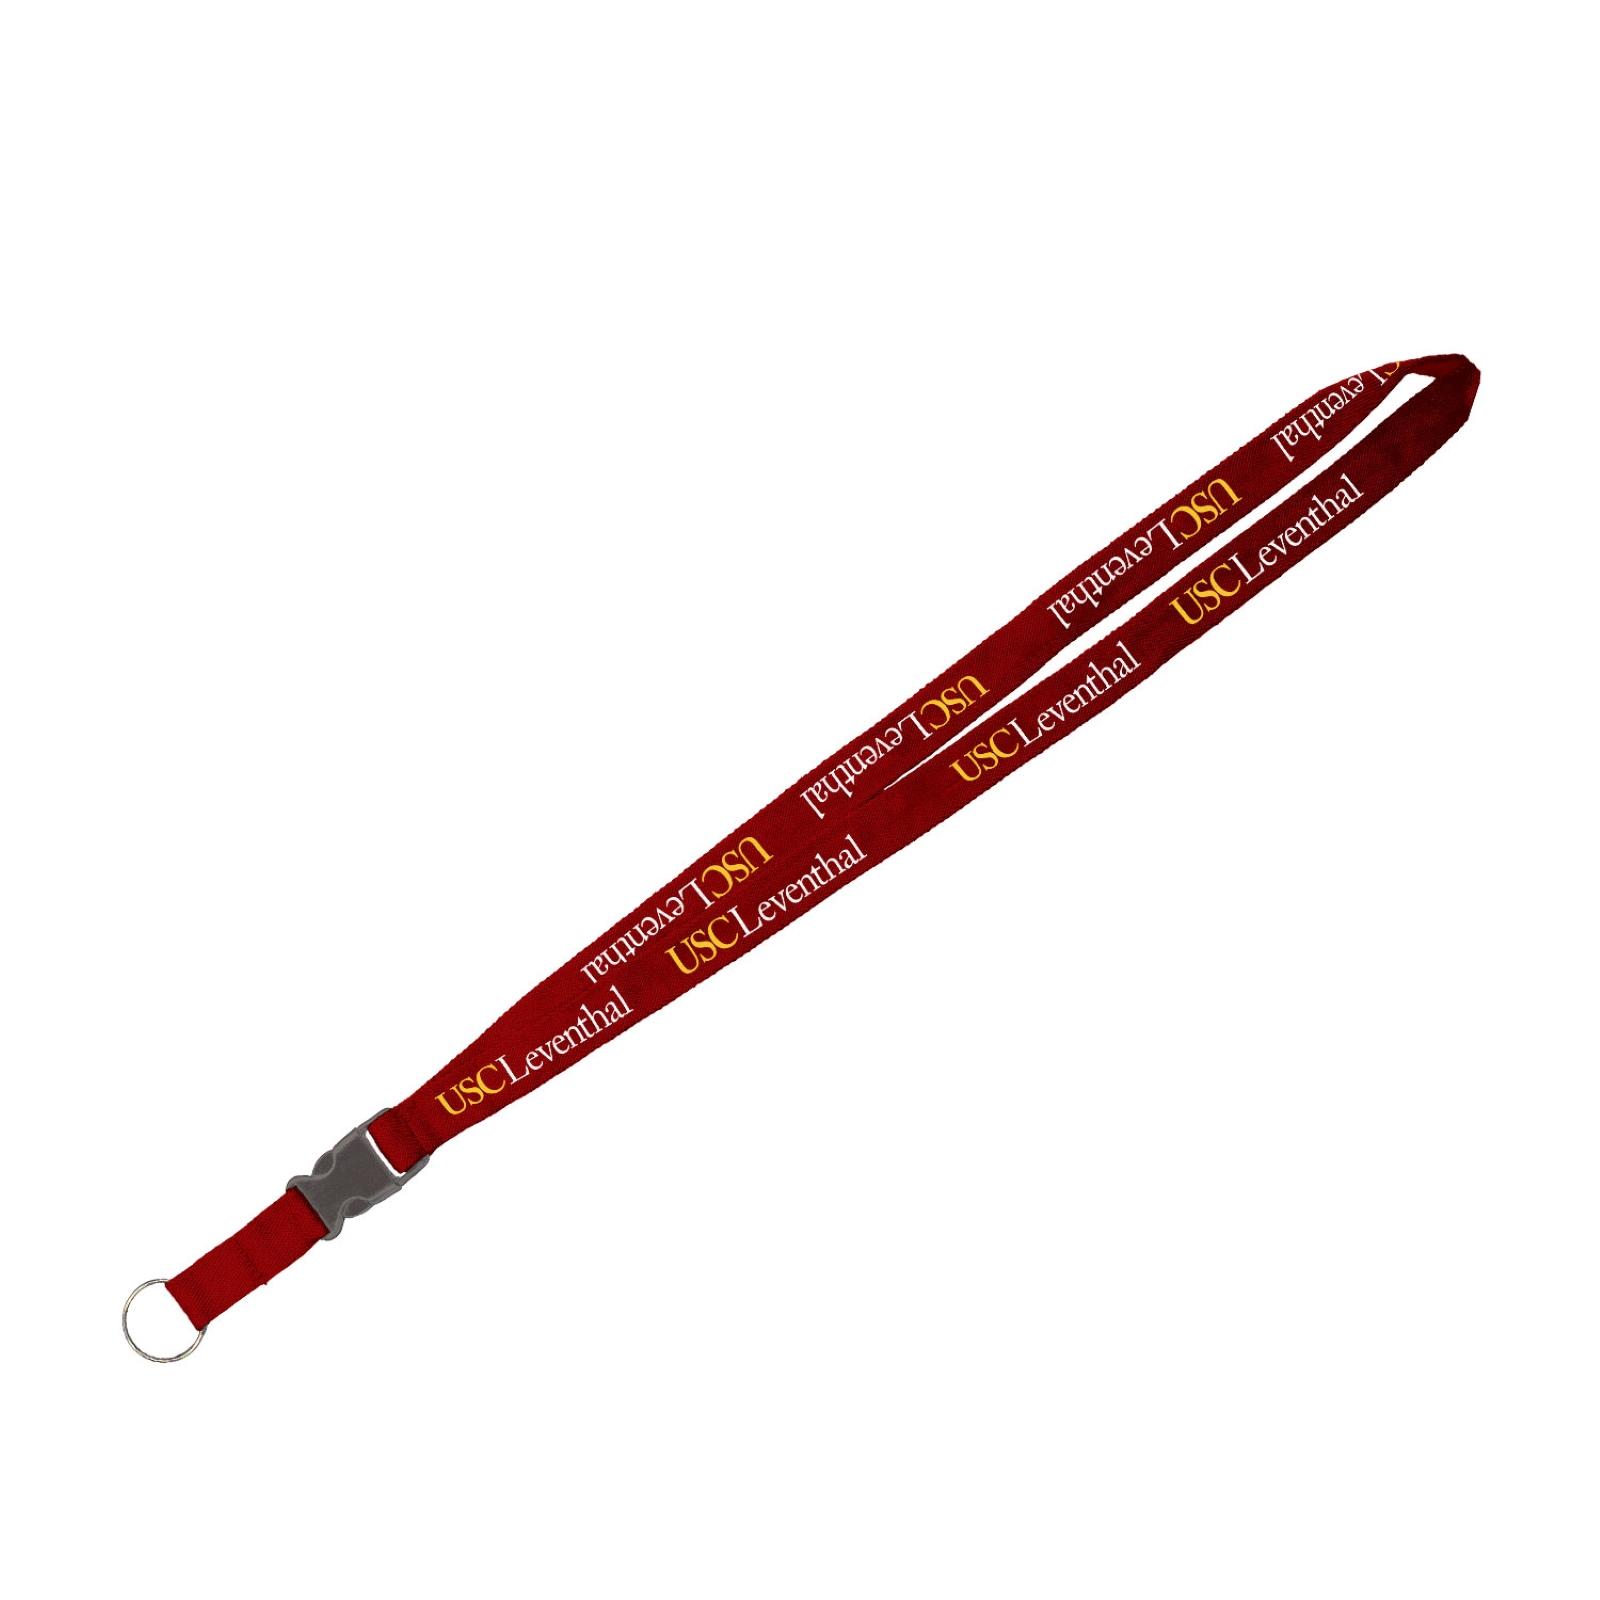 USC Leventhal Lanyard by Jardine image01